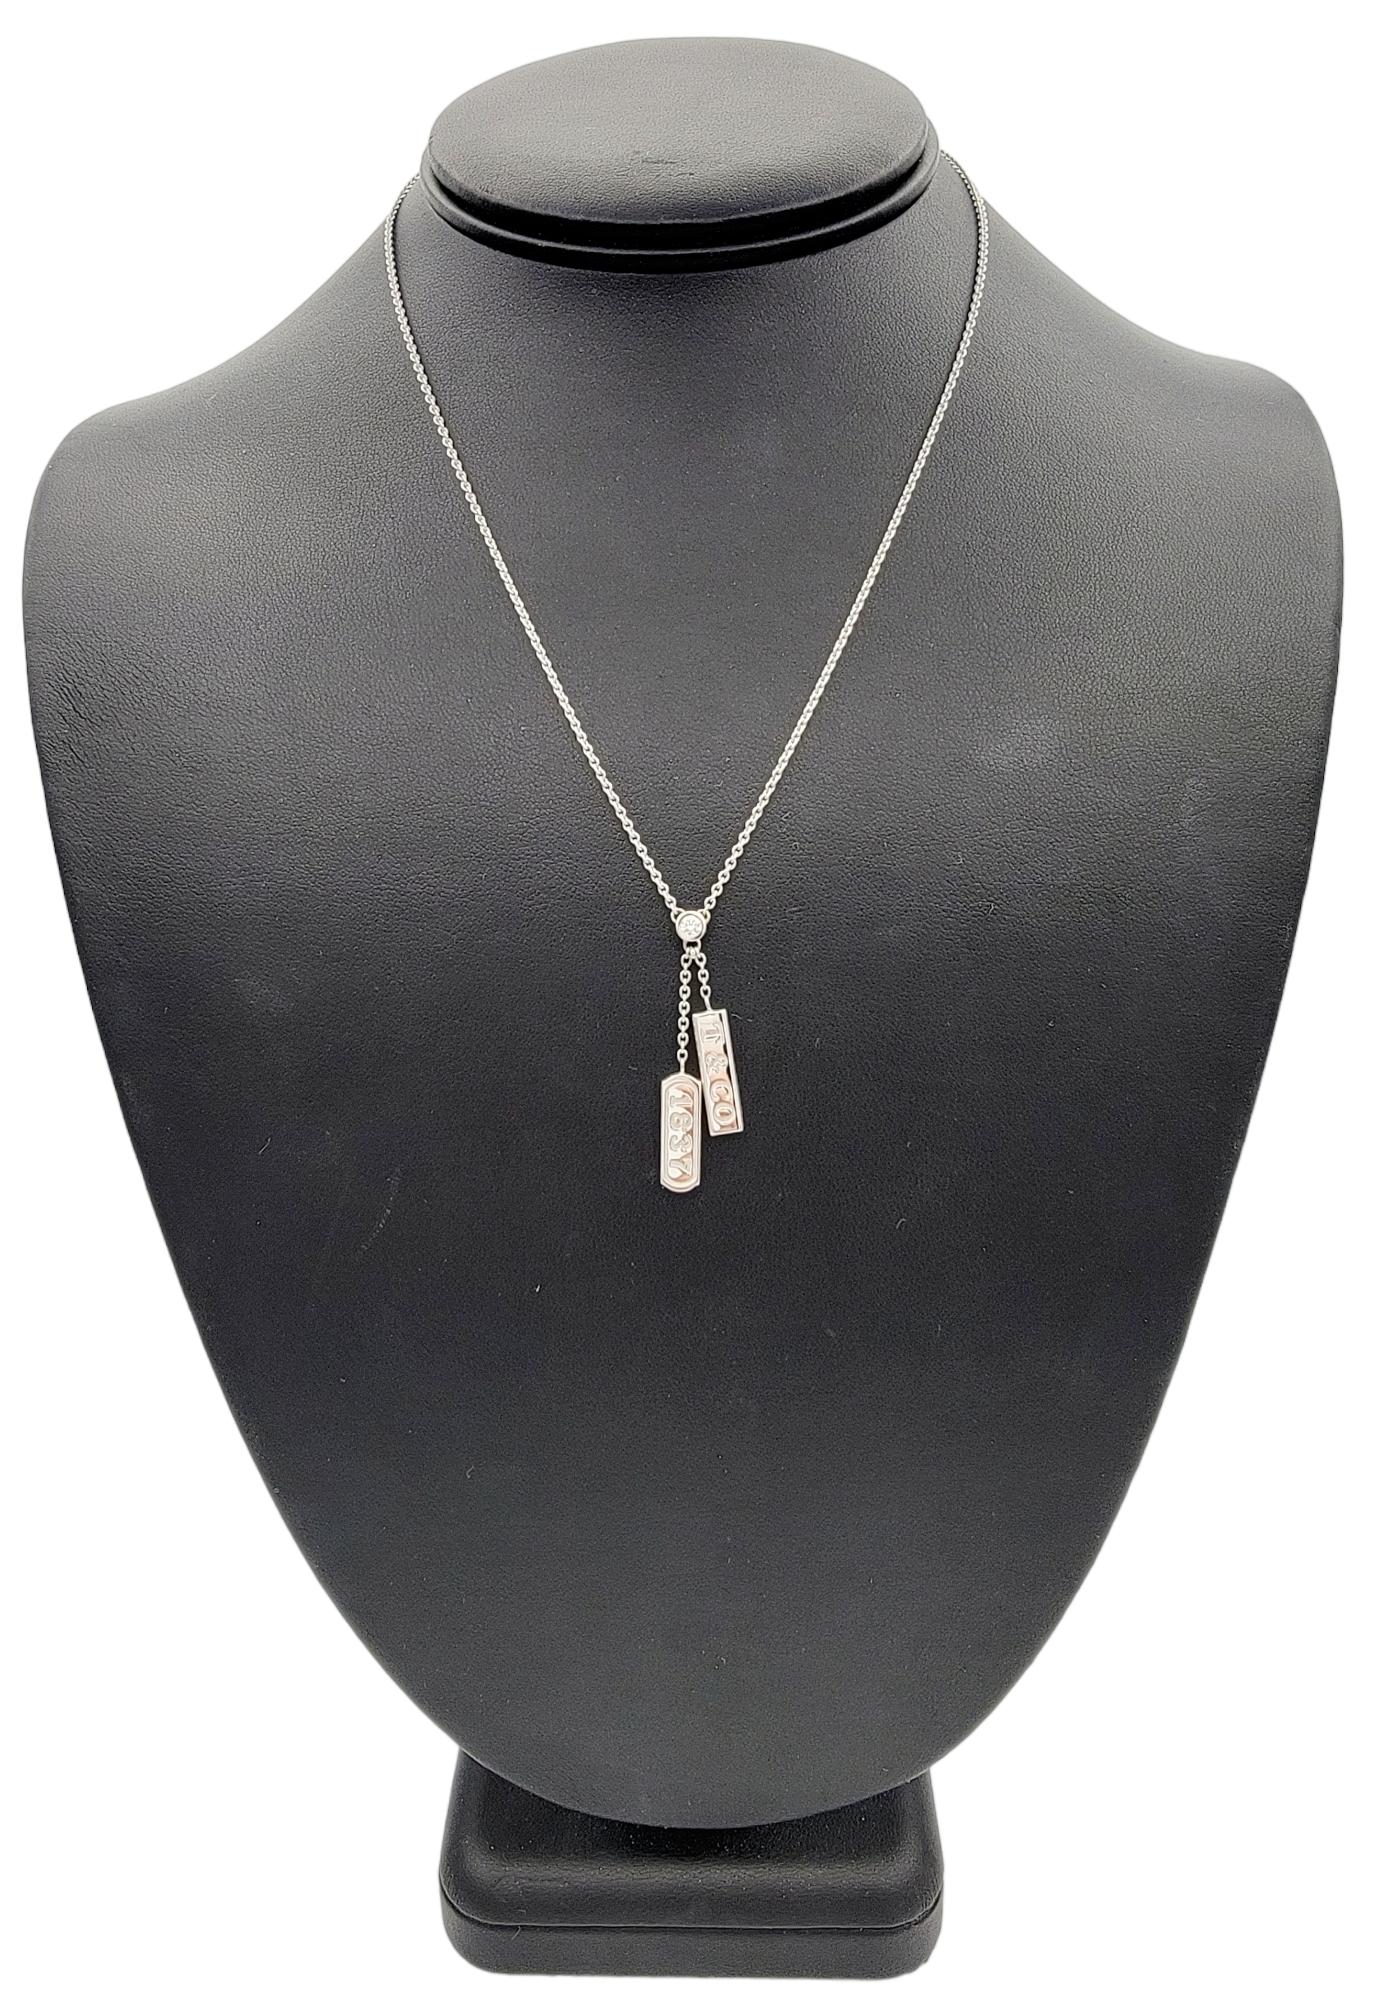 Women's Tiffany & Co. 1837 Double Bar Pendant Necklace with Diamonds in 18K White Gold For Sale